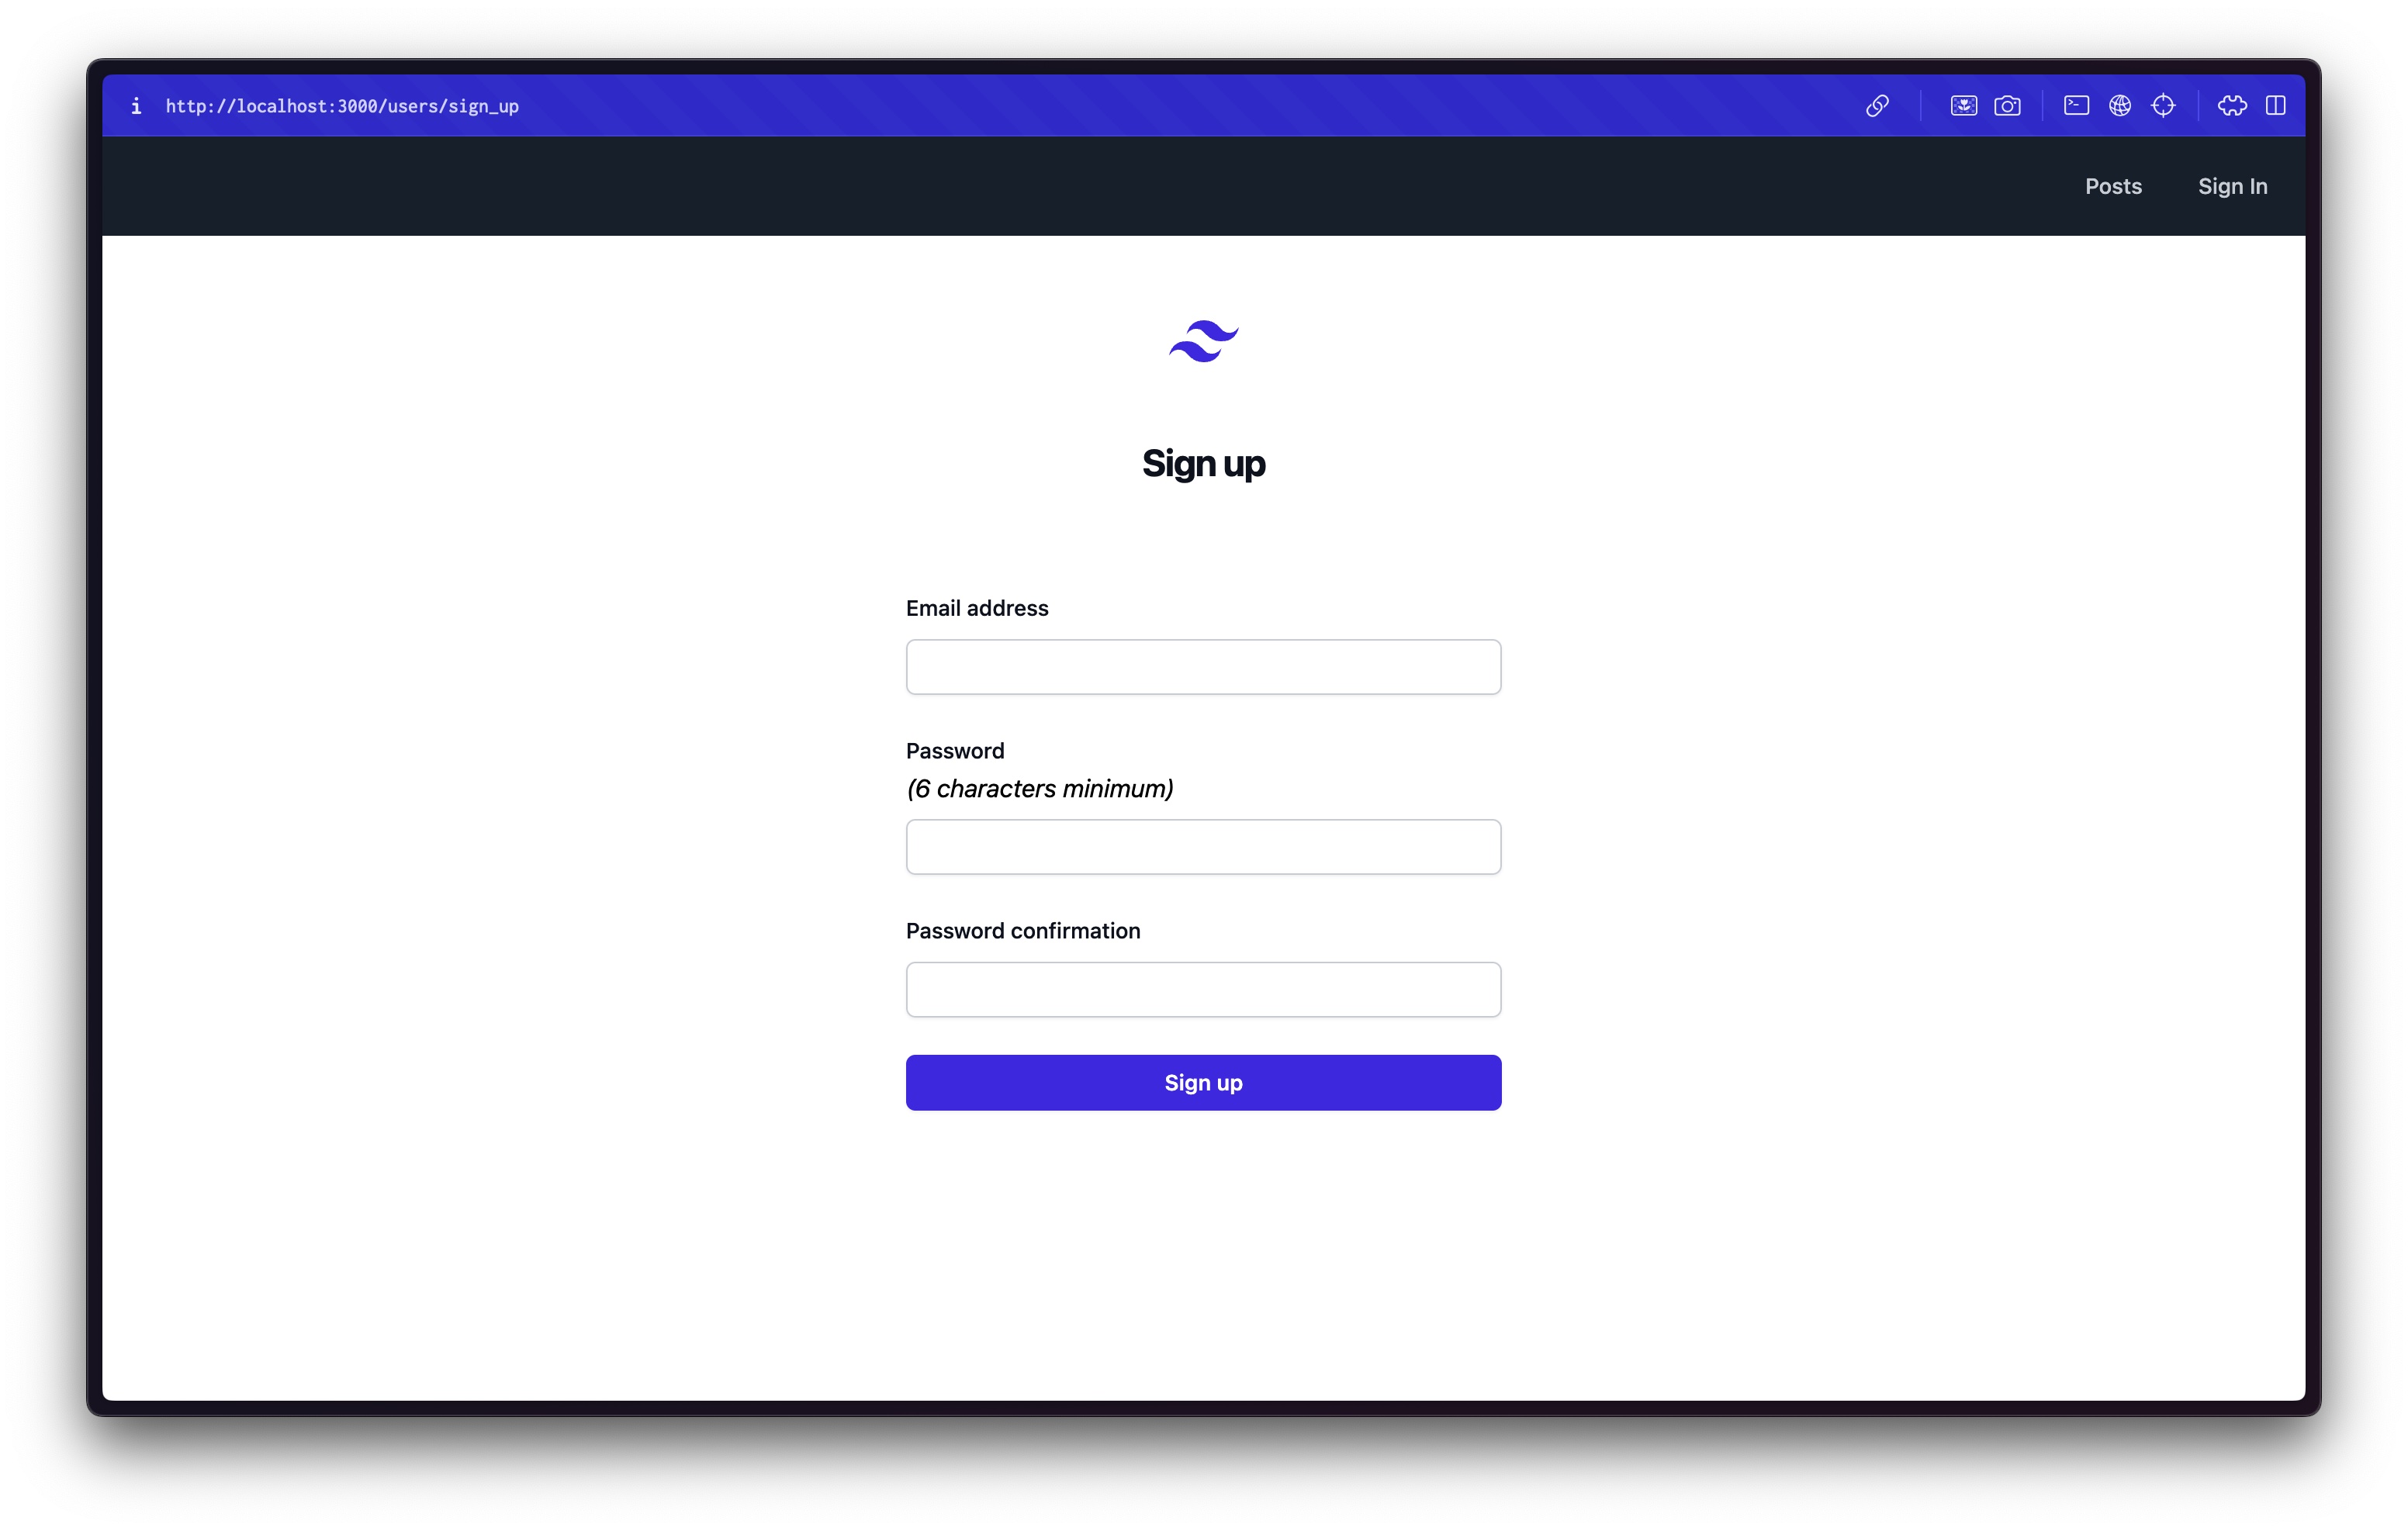 Registration page with Tailwind CSS